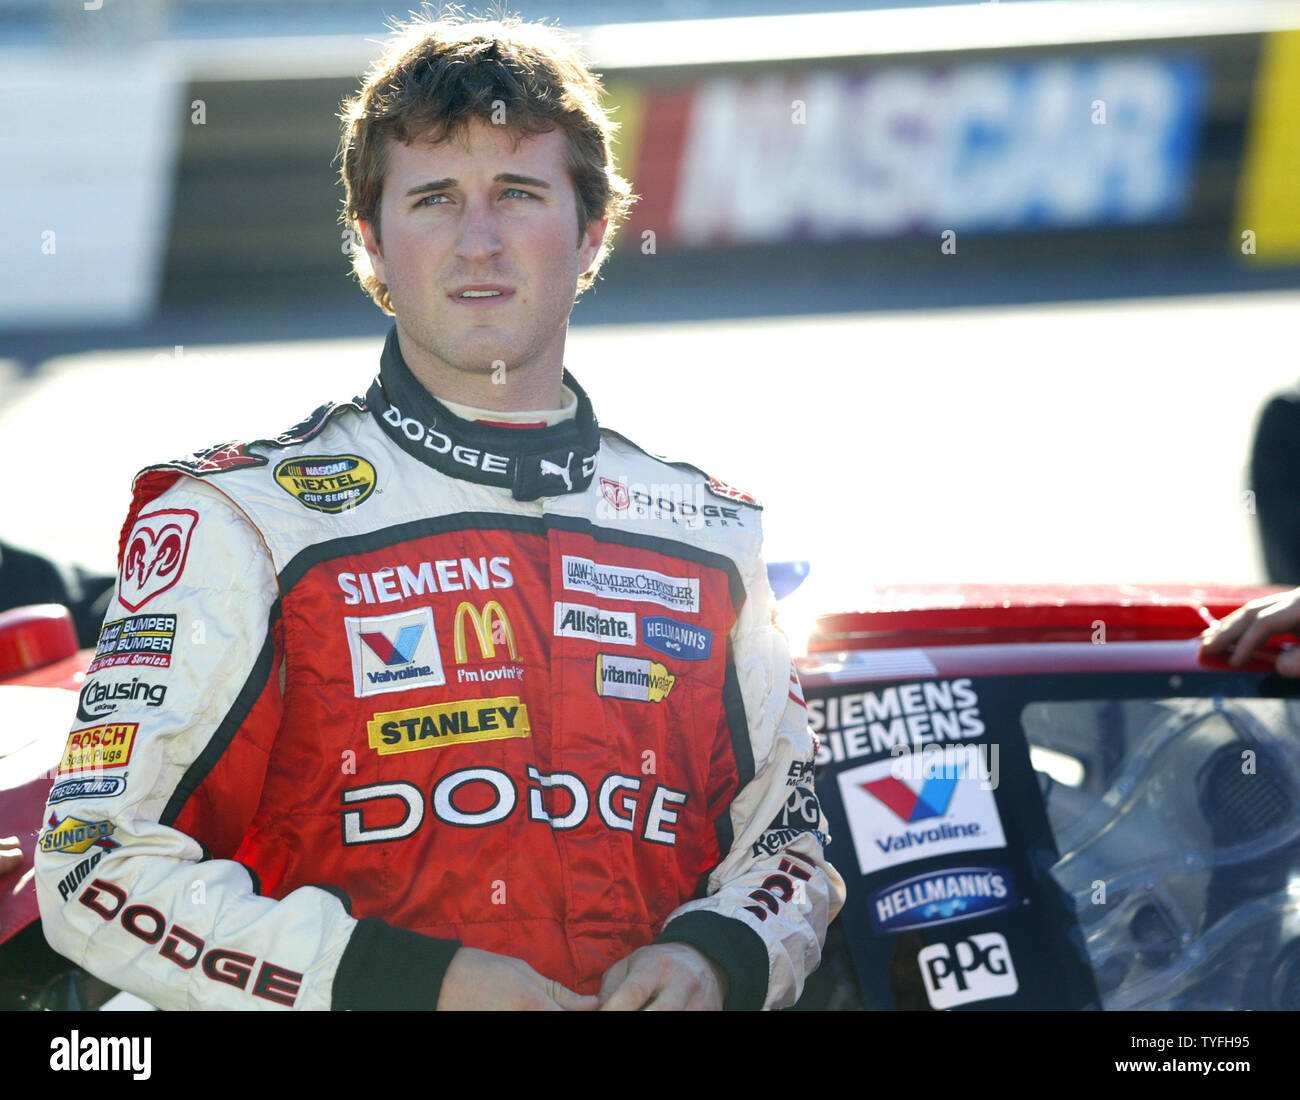 Race car driver Kasey Kahne stands by his Dodge Dealers/UAW Dodge during qualifying for the Subway 500 NASCAR race at Martinsville Speedway in Martinsville, Virginia on October 20, 2006. Kahne is currently in eighth place in the Nextel Cup Chase. (UPI Photo/Nell Redmond) Stock Photo